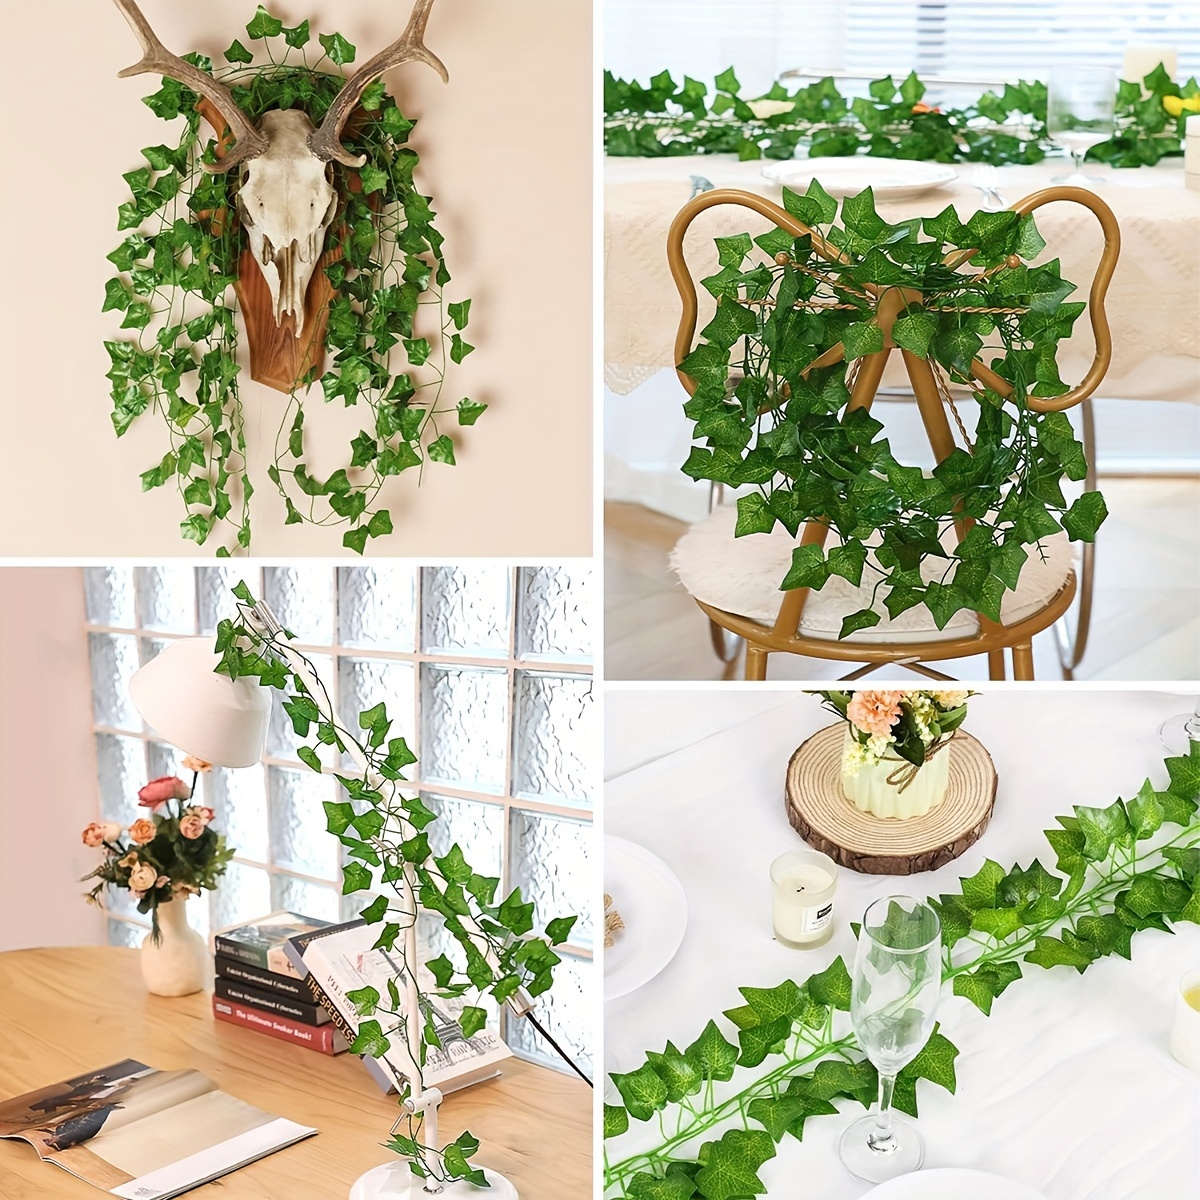 Artificial Plants Party Supplies Vine Leaves Ratten Hanging Ivy Fake Vine  Plants Wall Creeper Wedding Home Garden Decoration Grape Ratten Leave  20220110 Q2 From Sd007, $4.04